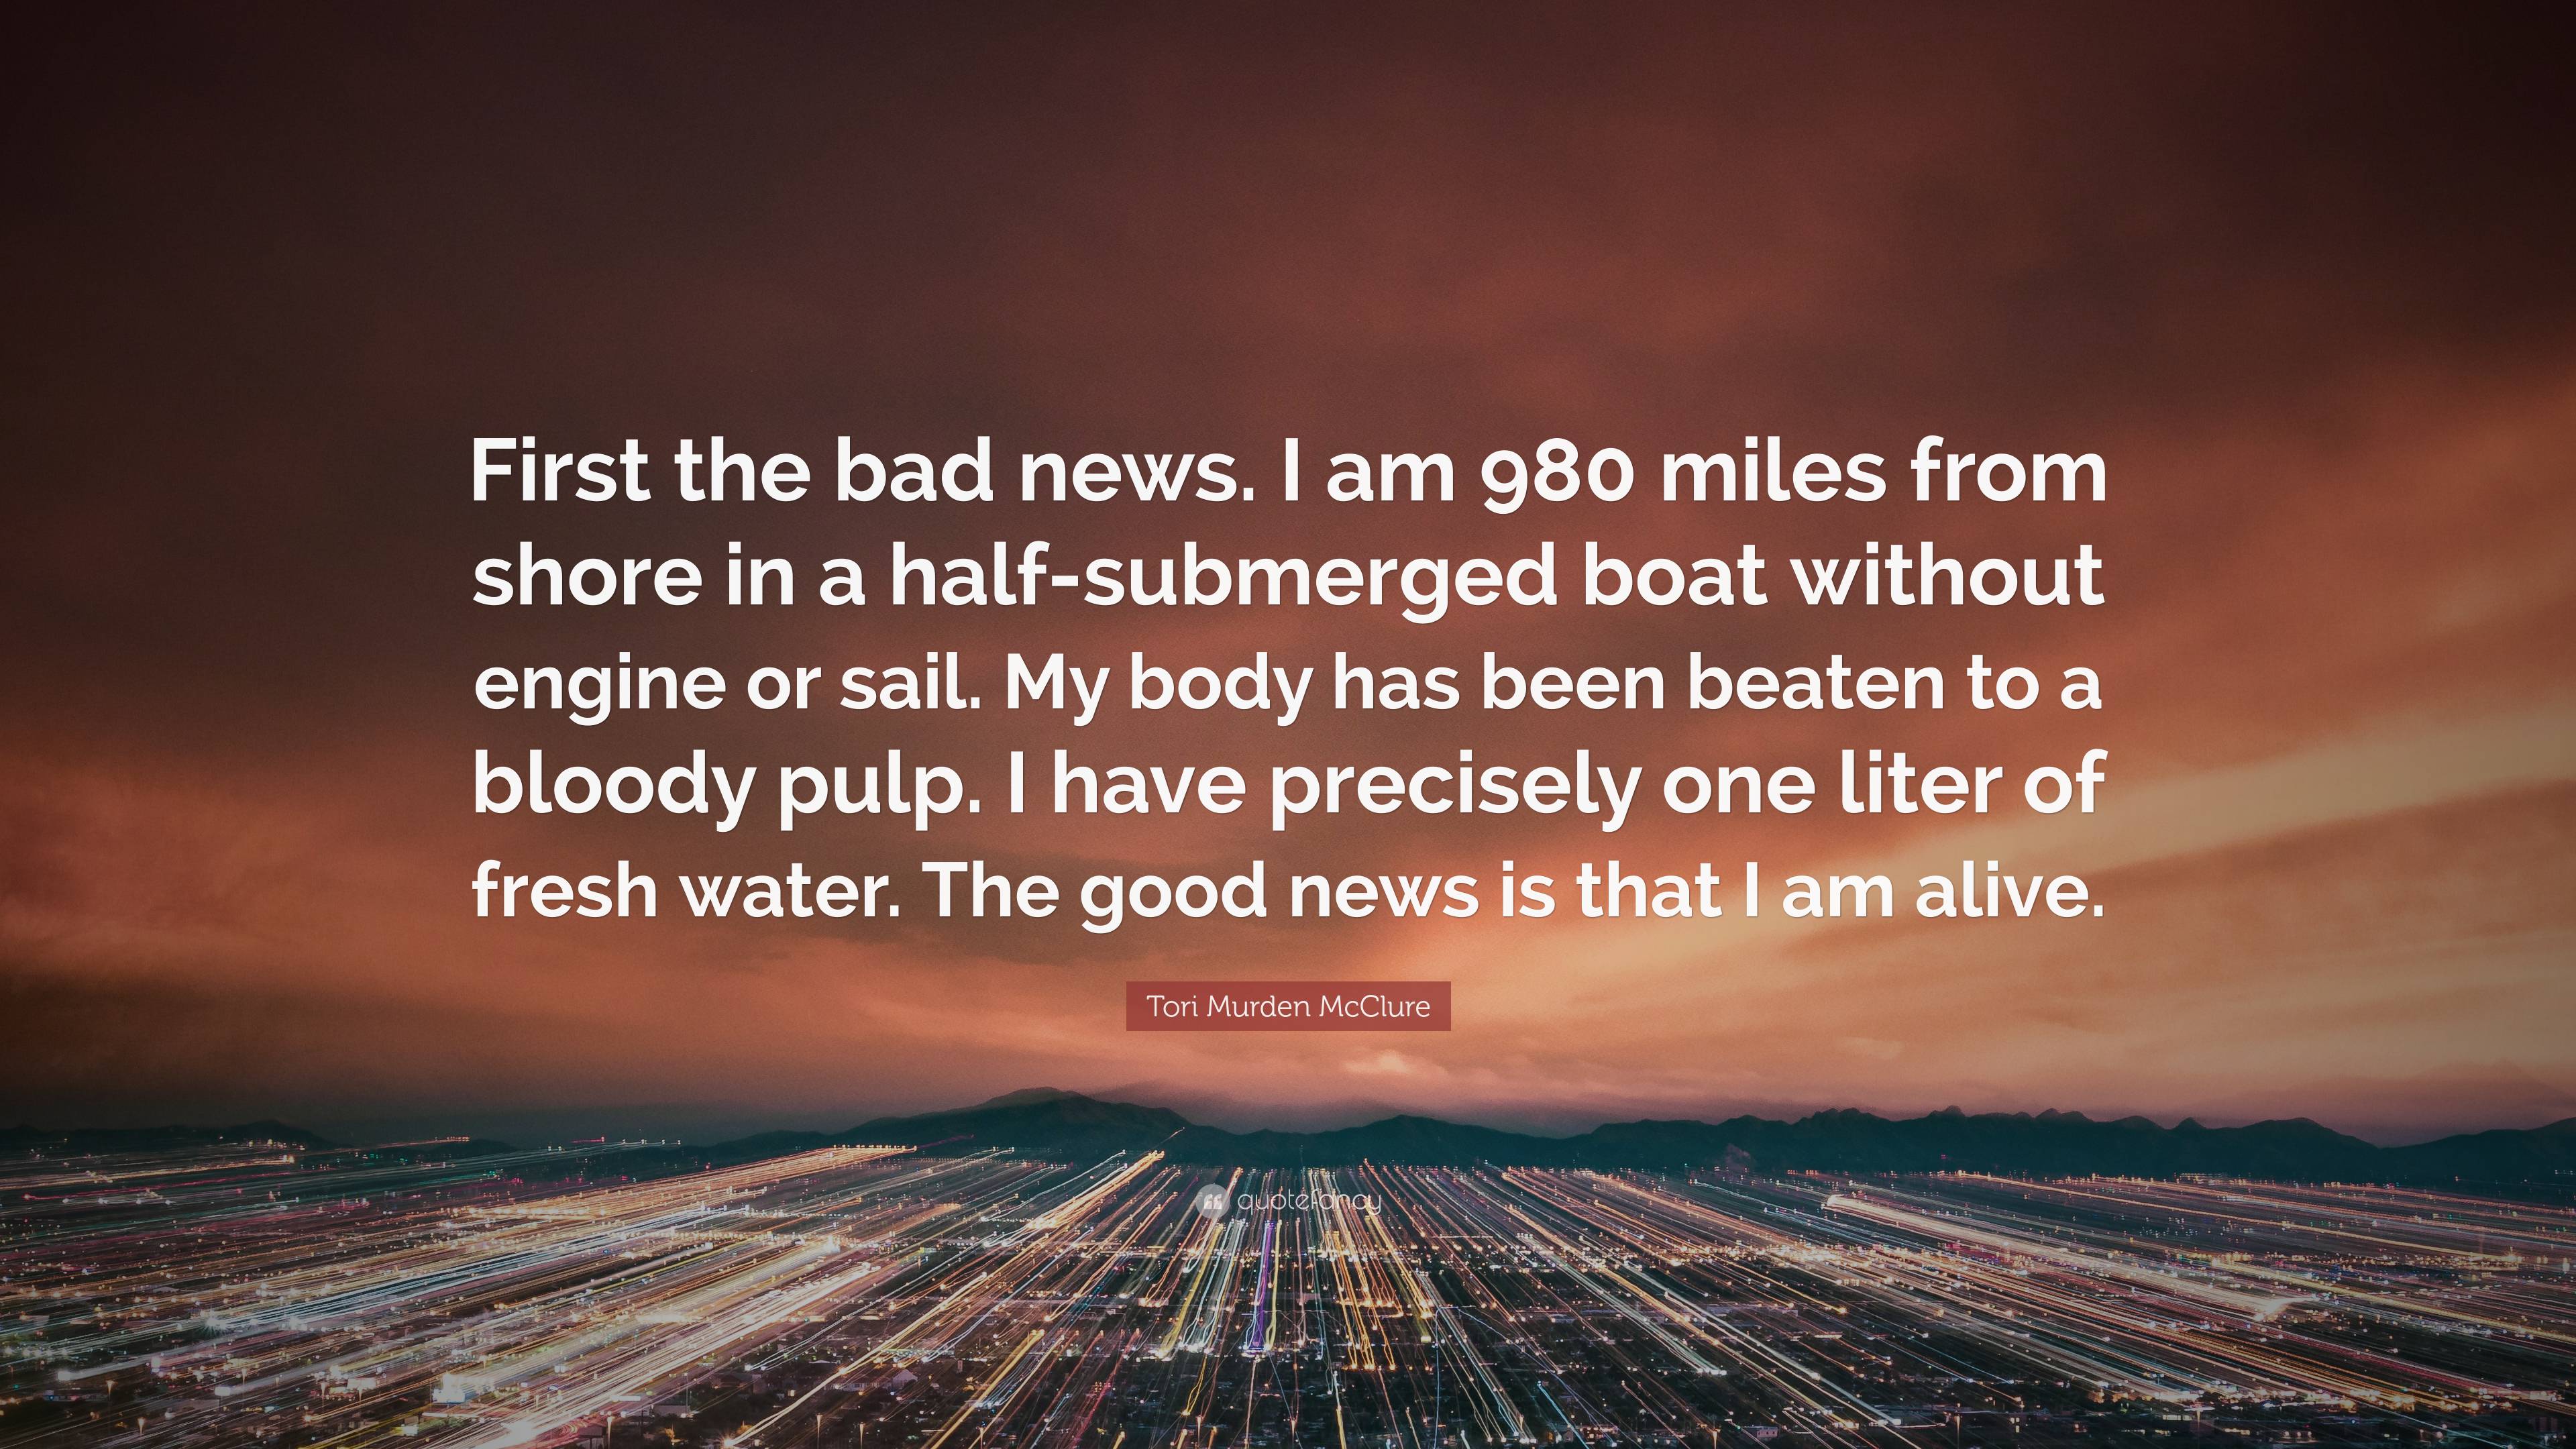 Tori Murden McClure Quote: “First the bad news. I am 980 miles 